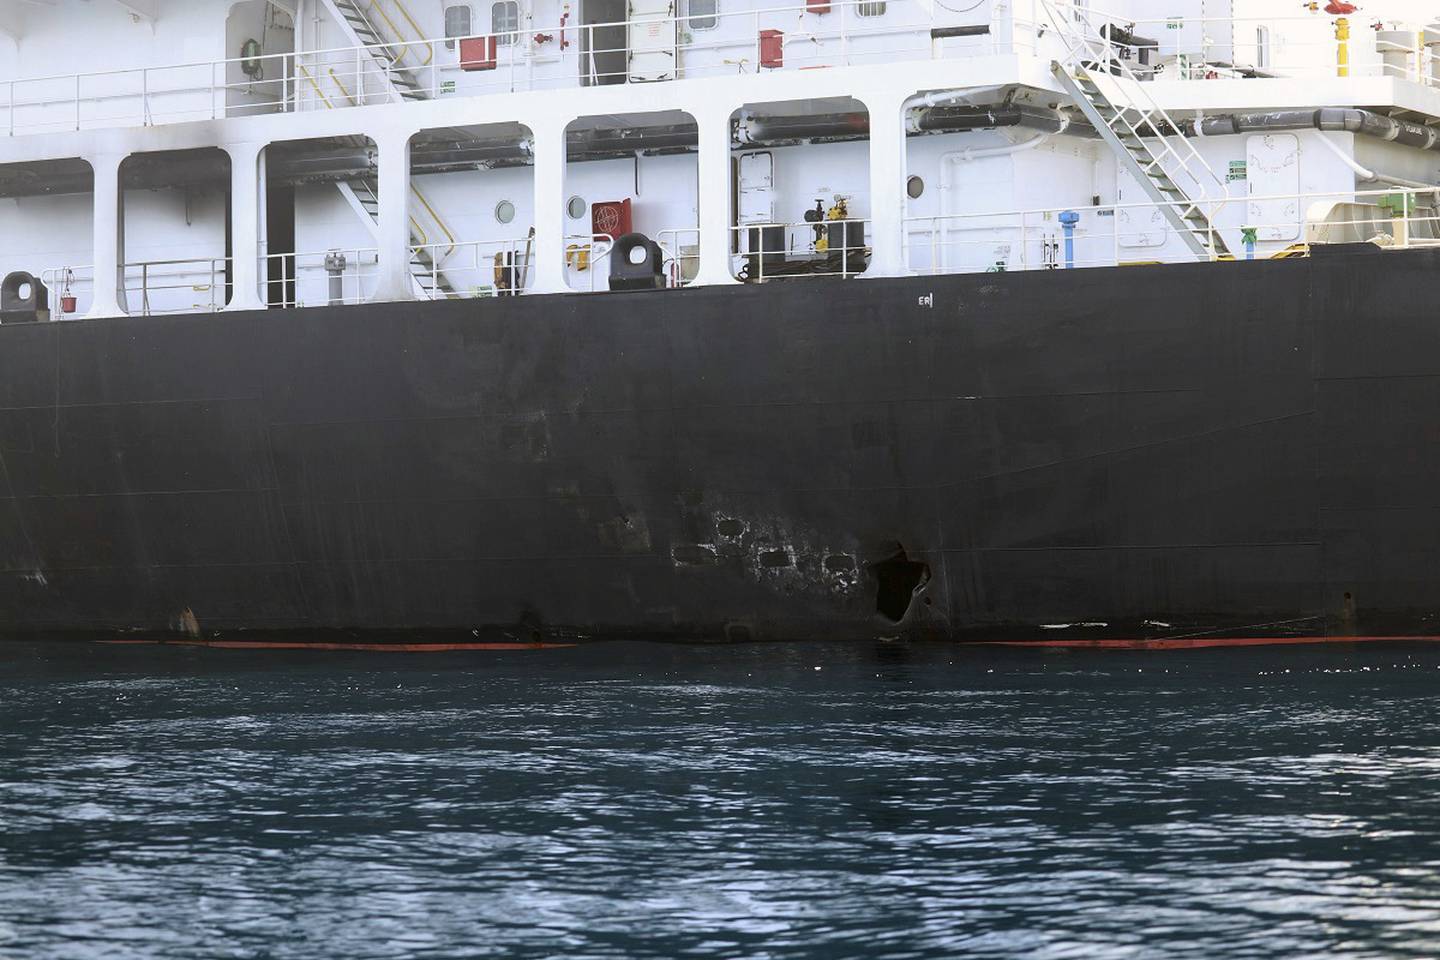 This image released by the U.S. Department of Defense on Monday, June 17, 2019, is a view of hull penetration/blast damage on the starboard side of the motor vessel M/T Kokuka Courageous, which the Navy says was sustained from a limpet mine attack while operating in the Gulf of Oman, on June 13th. (U.S. Department of Defense via AP)